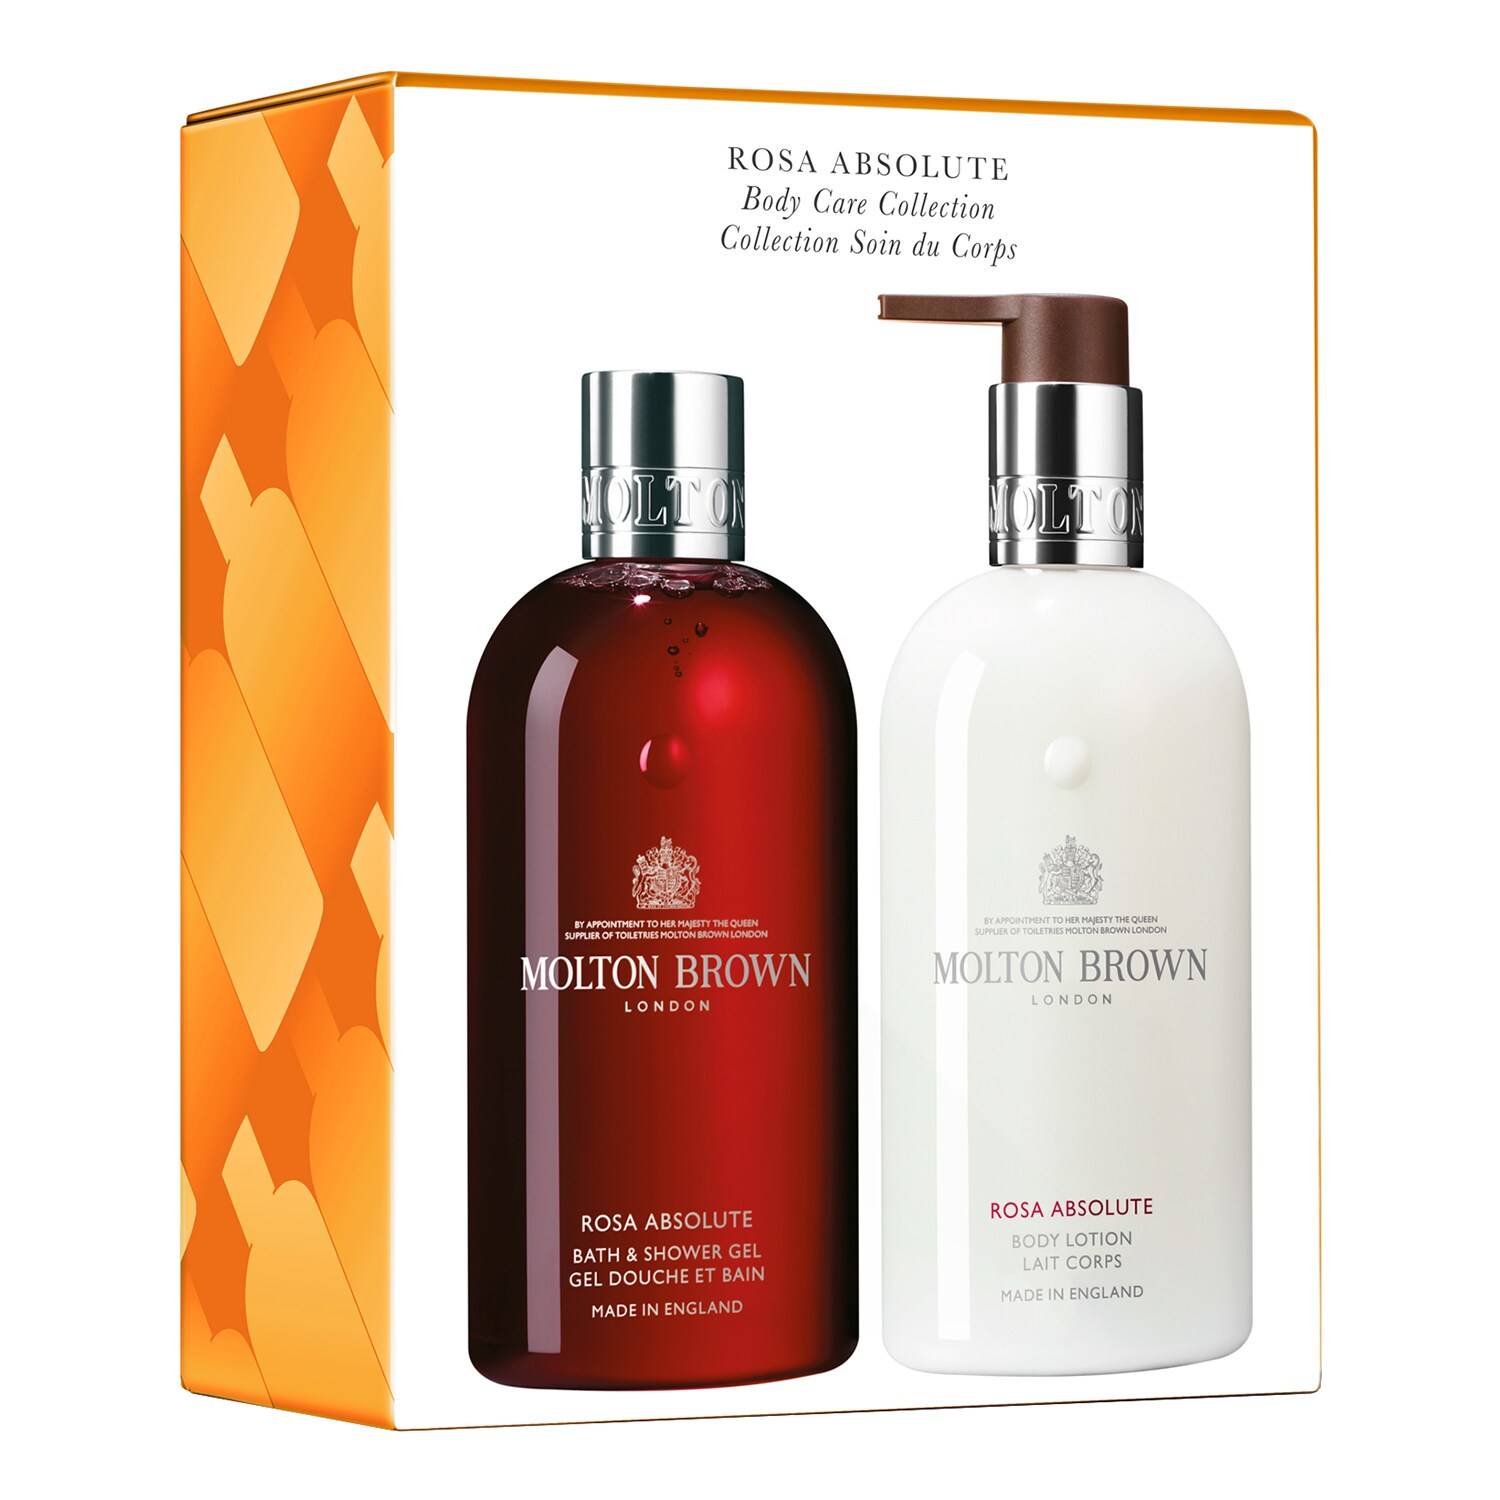 Molton Brown Rosa Absolute Body Care Gift Set